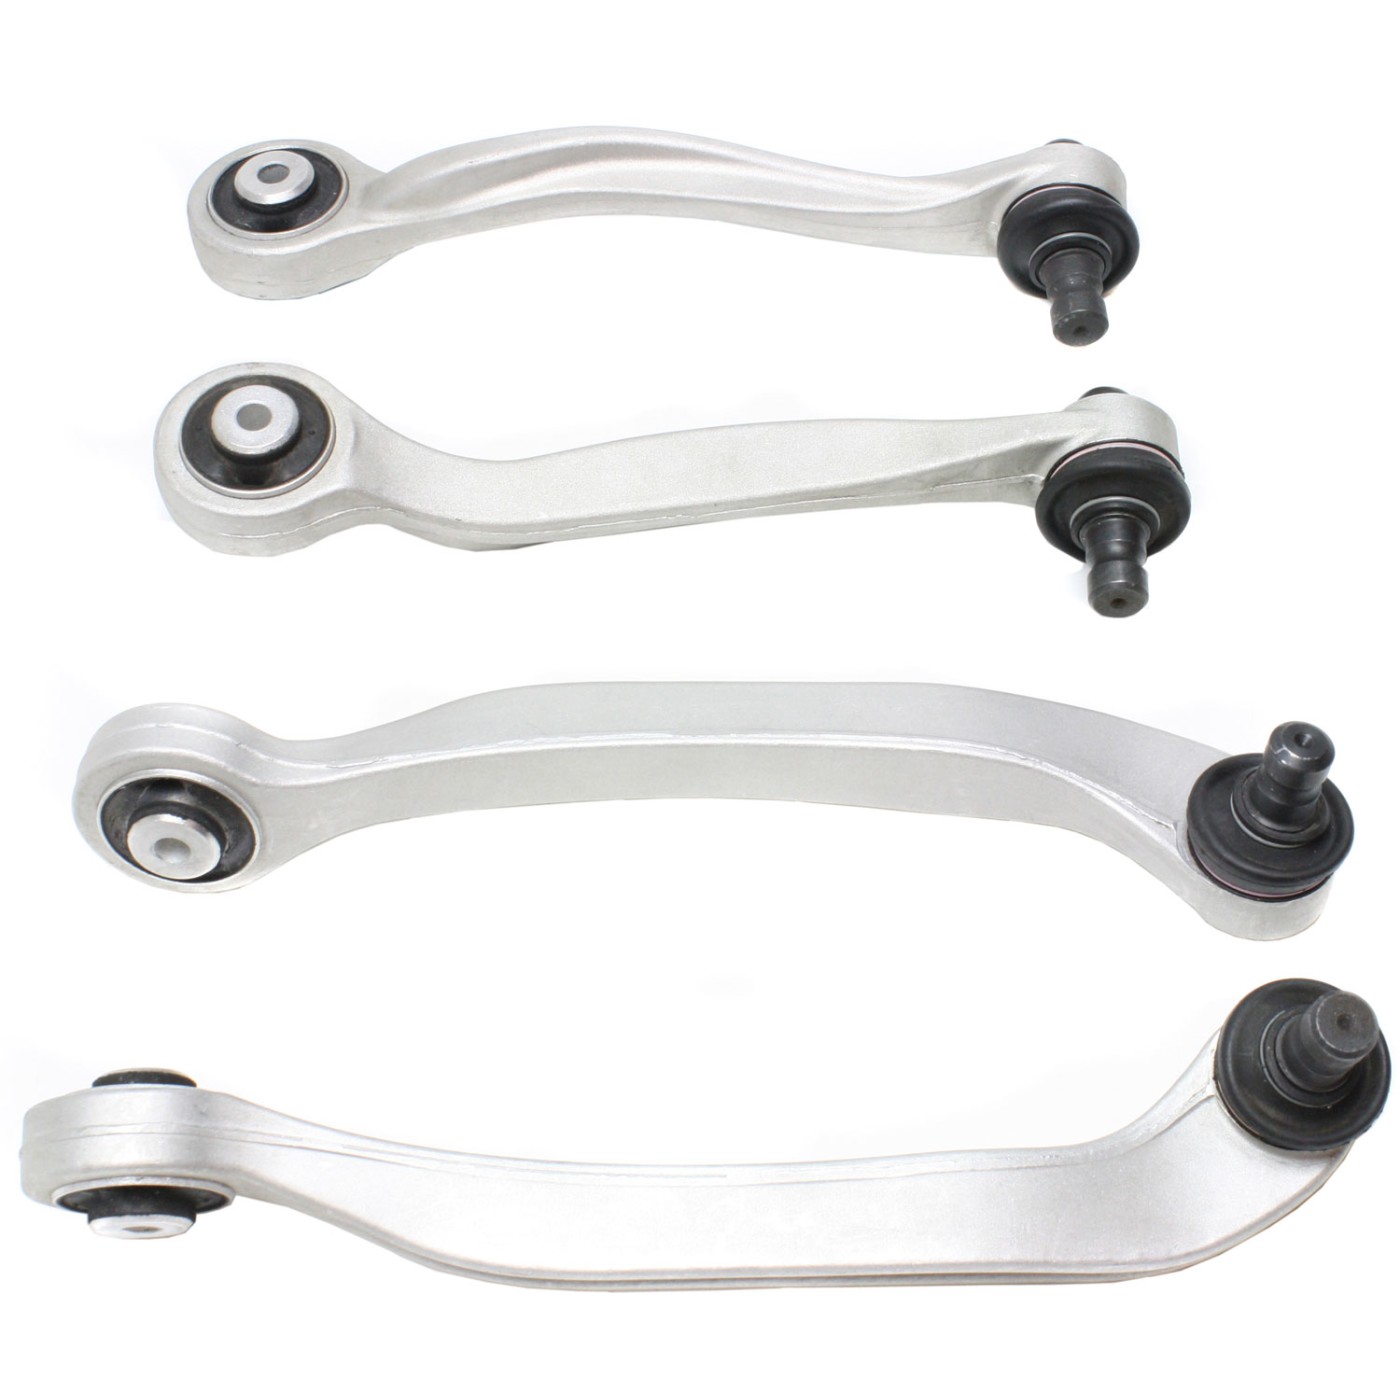 Control Arm Kit For 04 Audi A8 Quattro Front Upper Frontward And Rearward Set Of 4 Ebay 5794